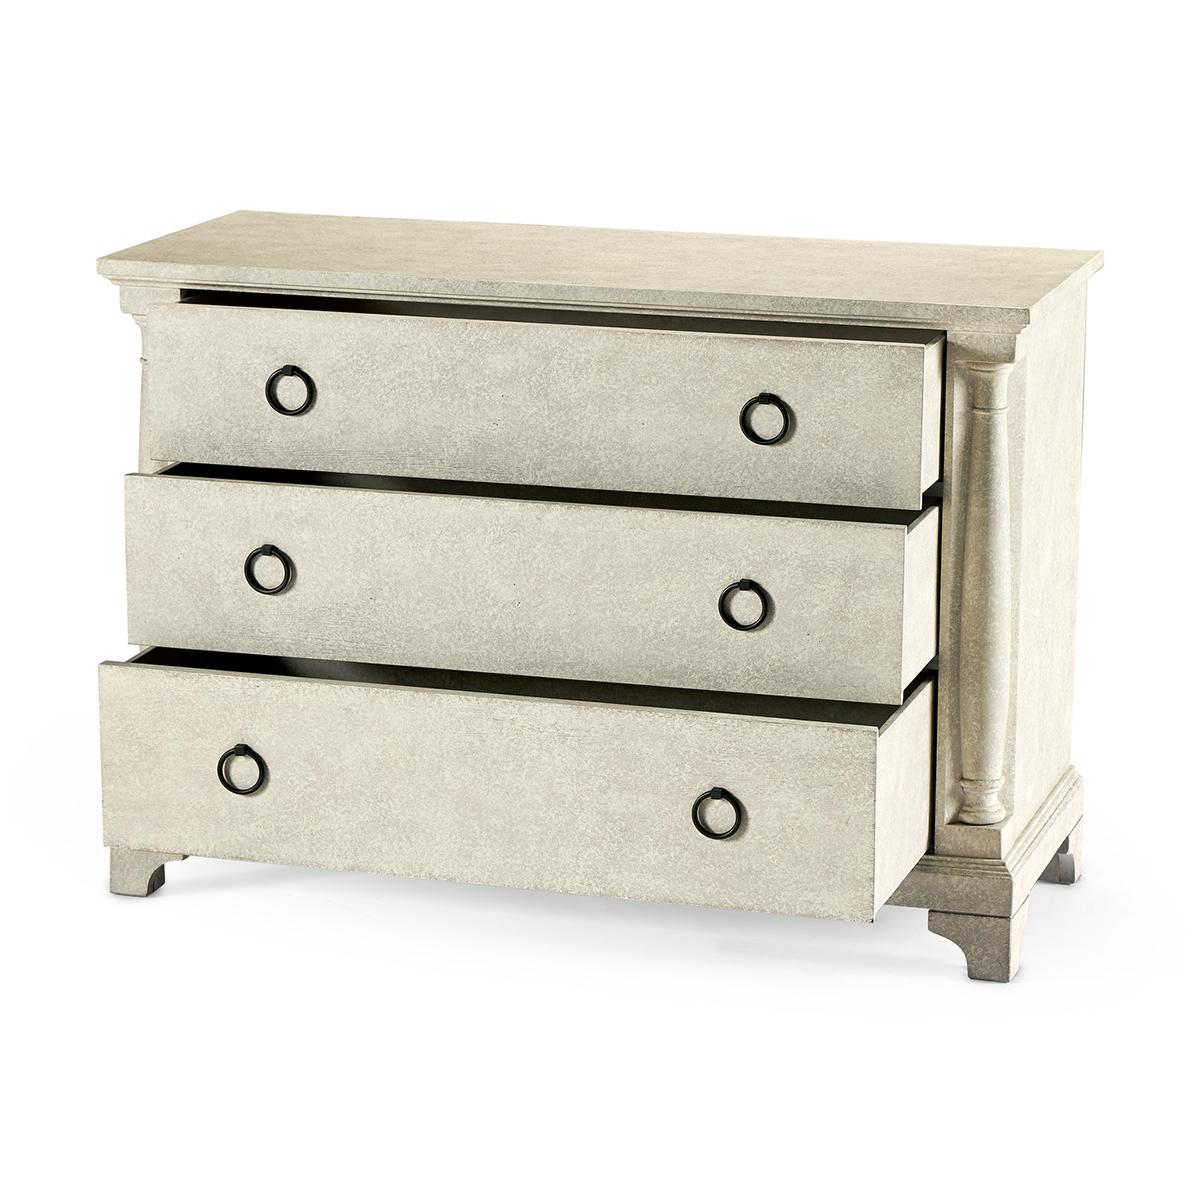 Vietnamese French Country Chest of Drawers, Whitewash For Sale